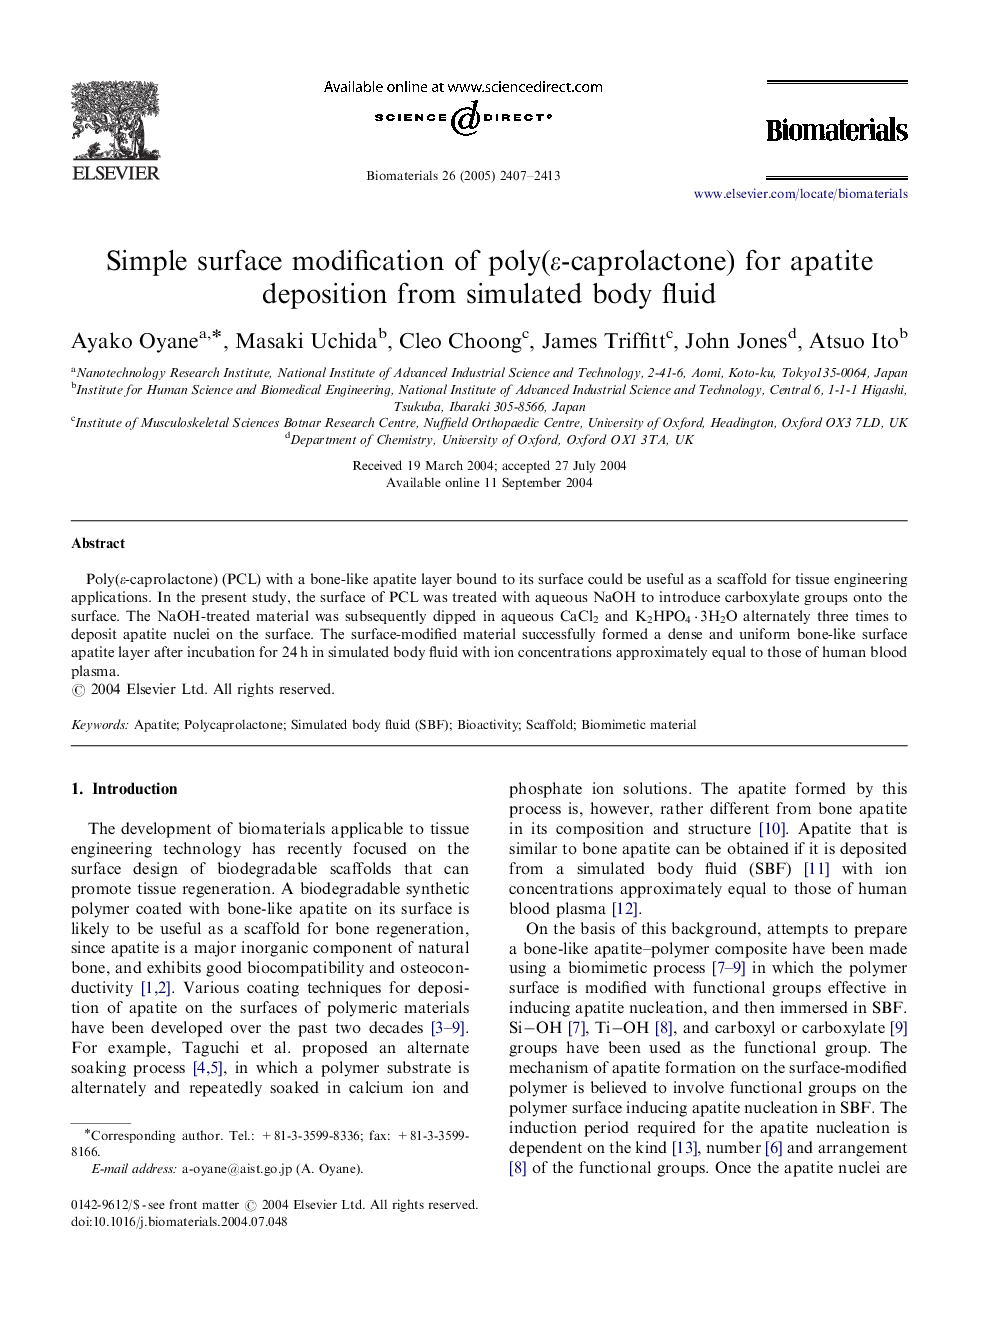 Simple surface modification of poly(ε-caprolactone) for apatite deposition from simulated body fluid